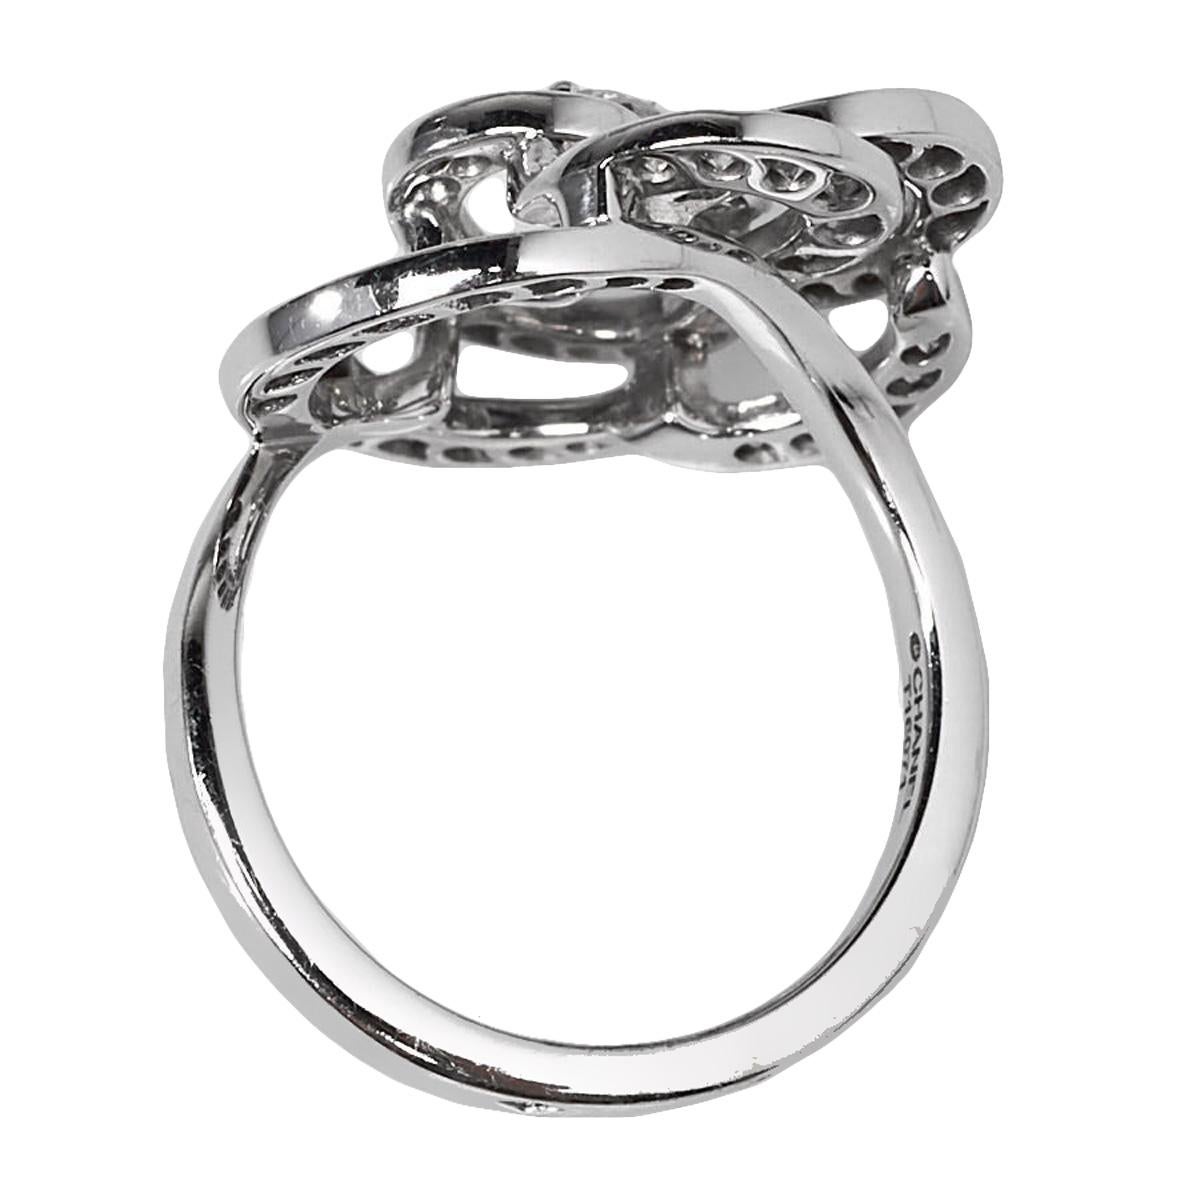 A fabulous Chanel Camelia diamond cocktail ring set with the finest Chanel round brilliant cut diamonds in 18k white gold.